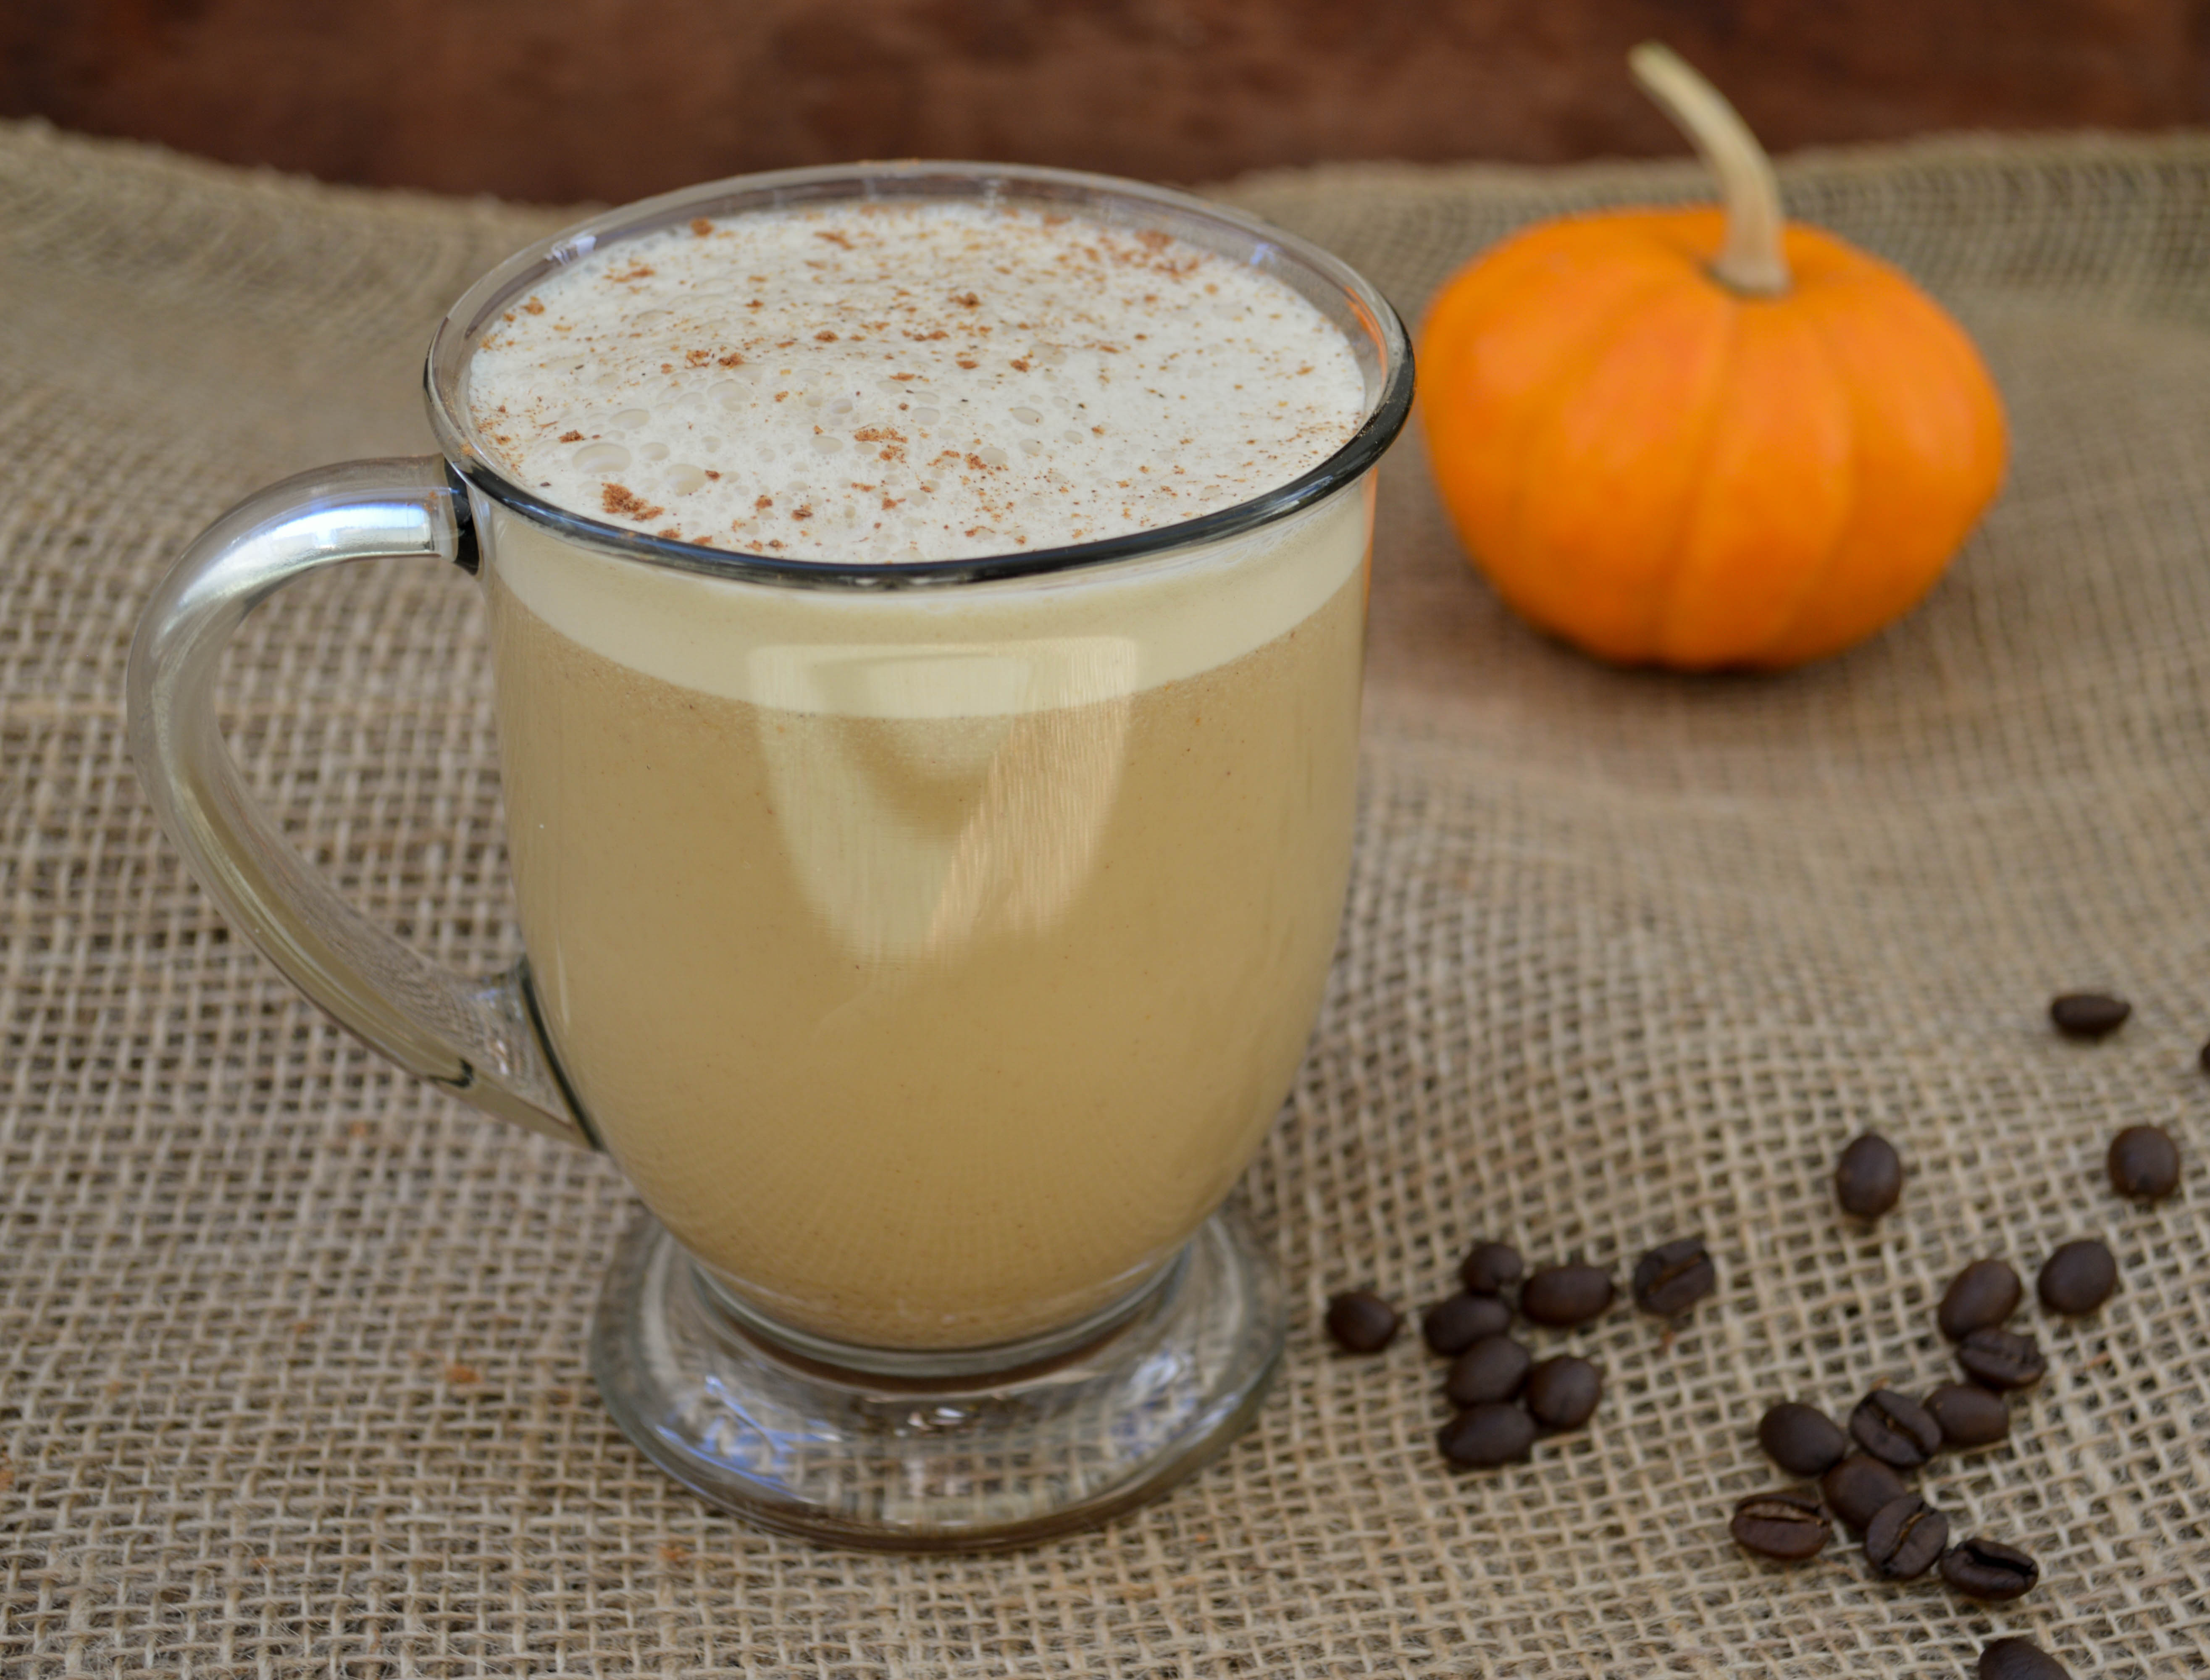 Sprouts & Chocolate: Creamy Vegan Pumpkin Spice Latte. This rich and creamy Fall favourite has gone vegan! The Starbucks famous version cannot be made without dairy so we must make them at home. Turns out it is super easy and quick. Don't wait in line, just make it yourself! Happy Fall!